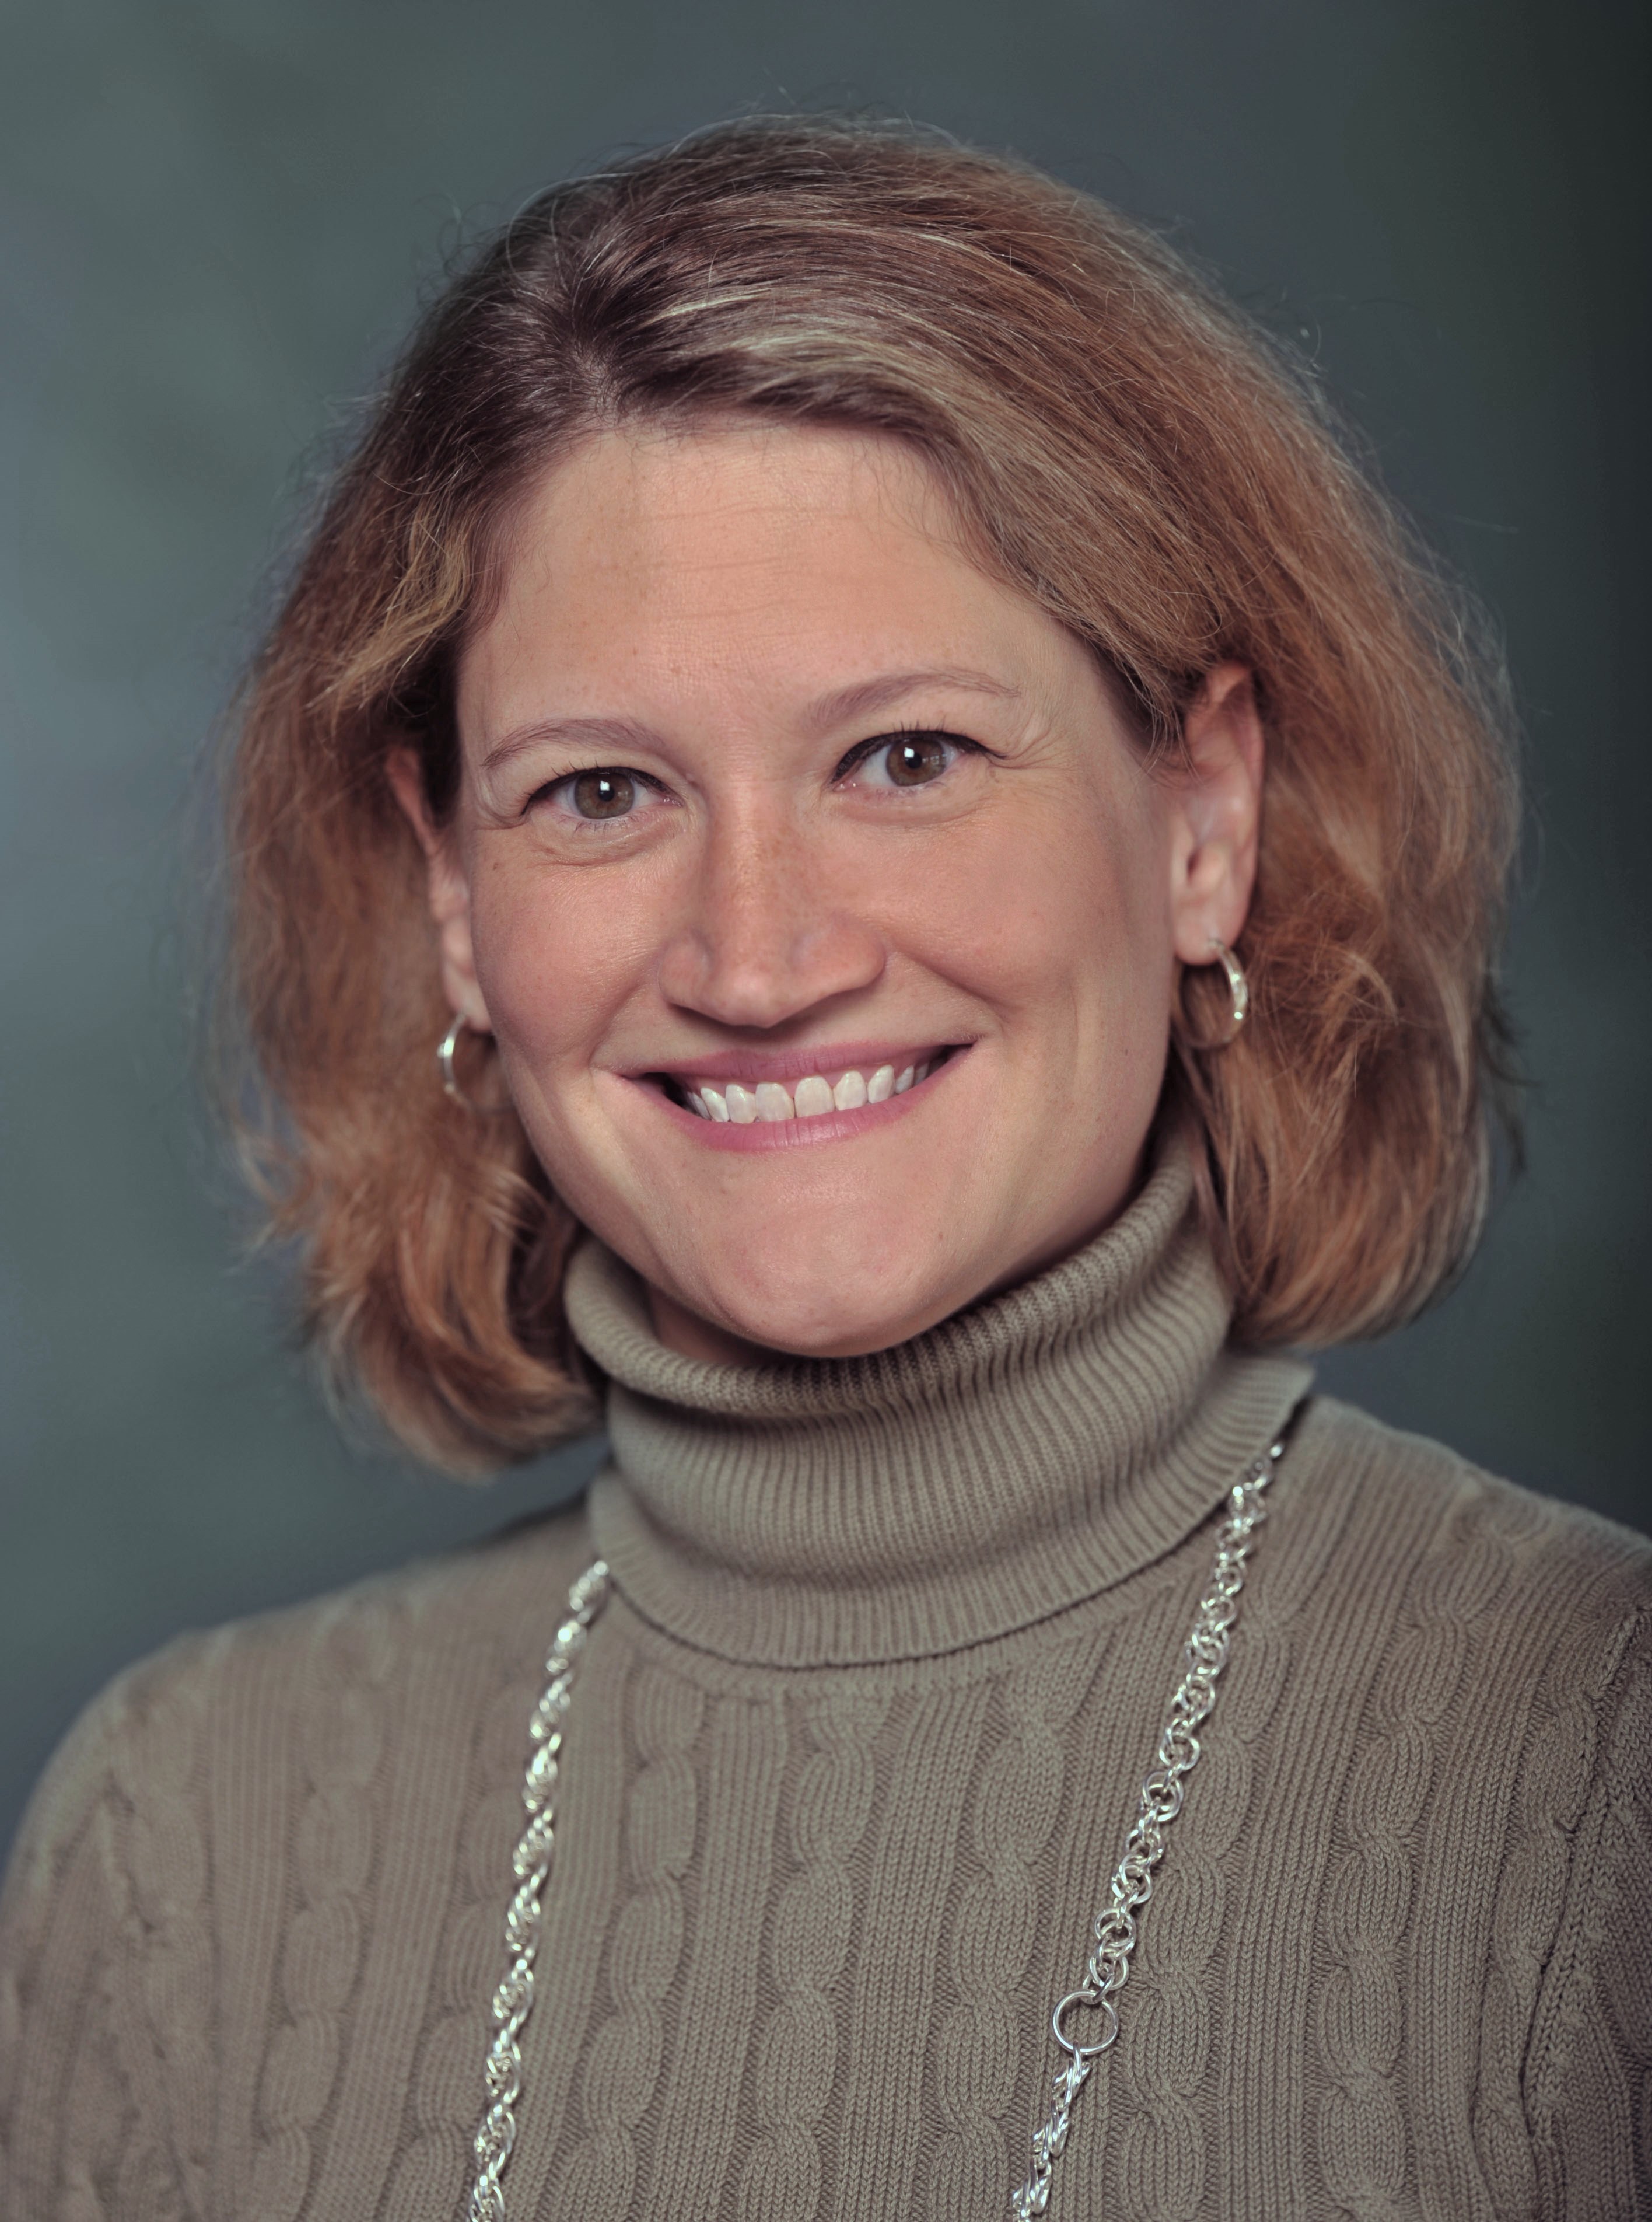 Dr. Marie Hansen is the dean of the College of Business at Husson University.